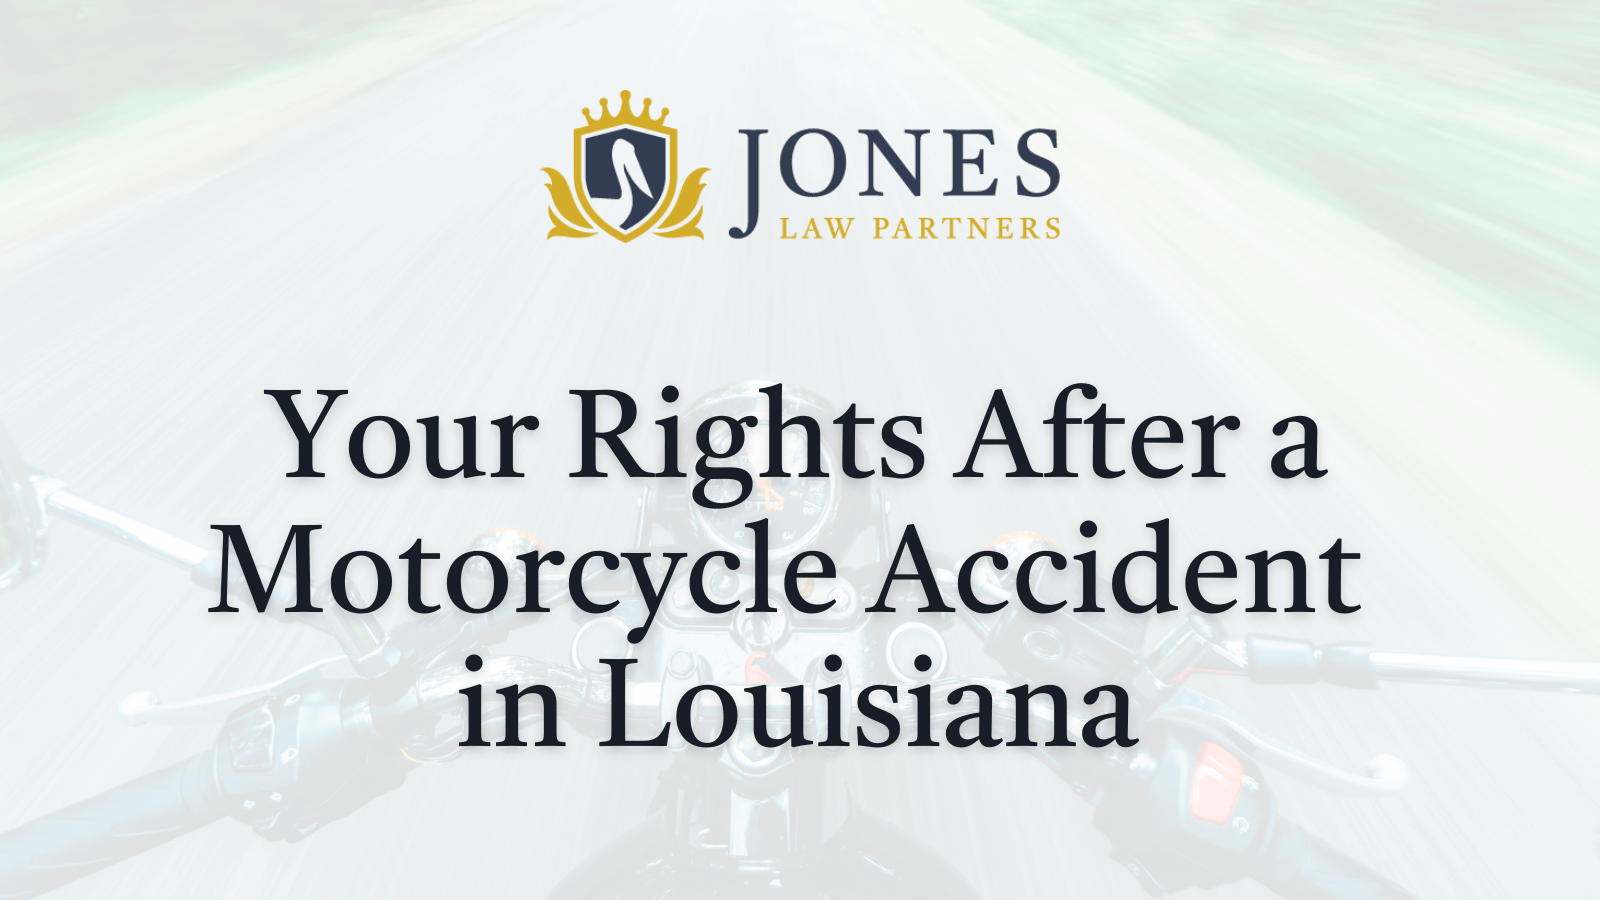 Your Rights After a Motorcycle Accident in Louisiana - Jones Law Partners - alexandria louisiana